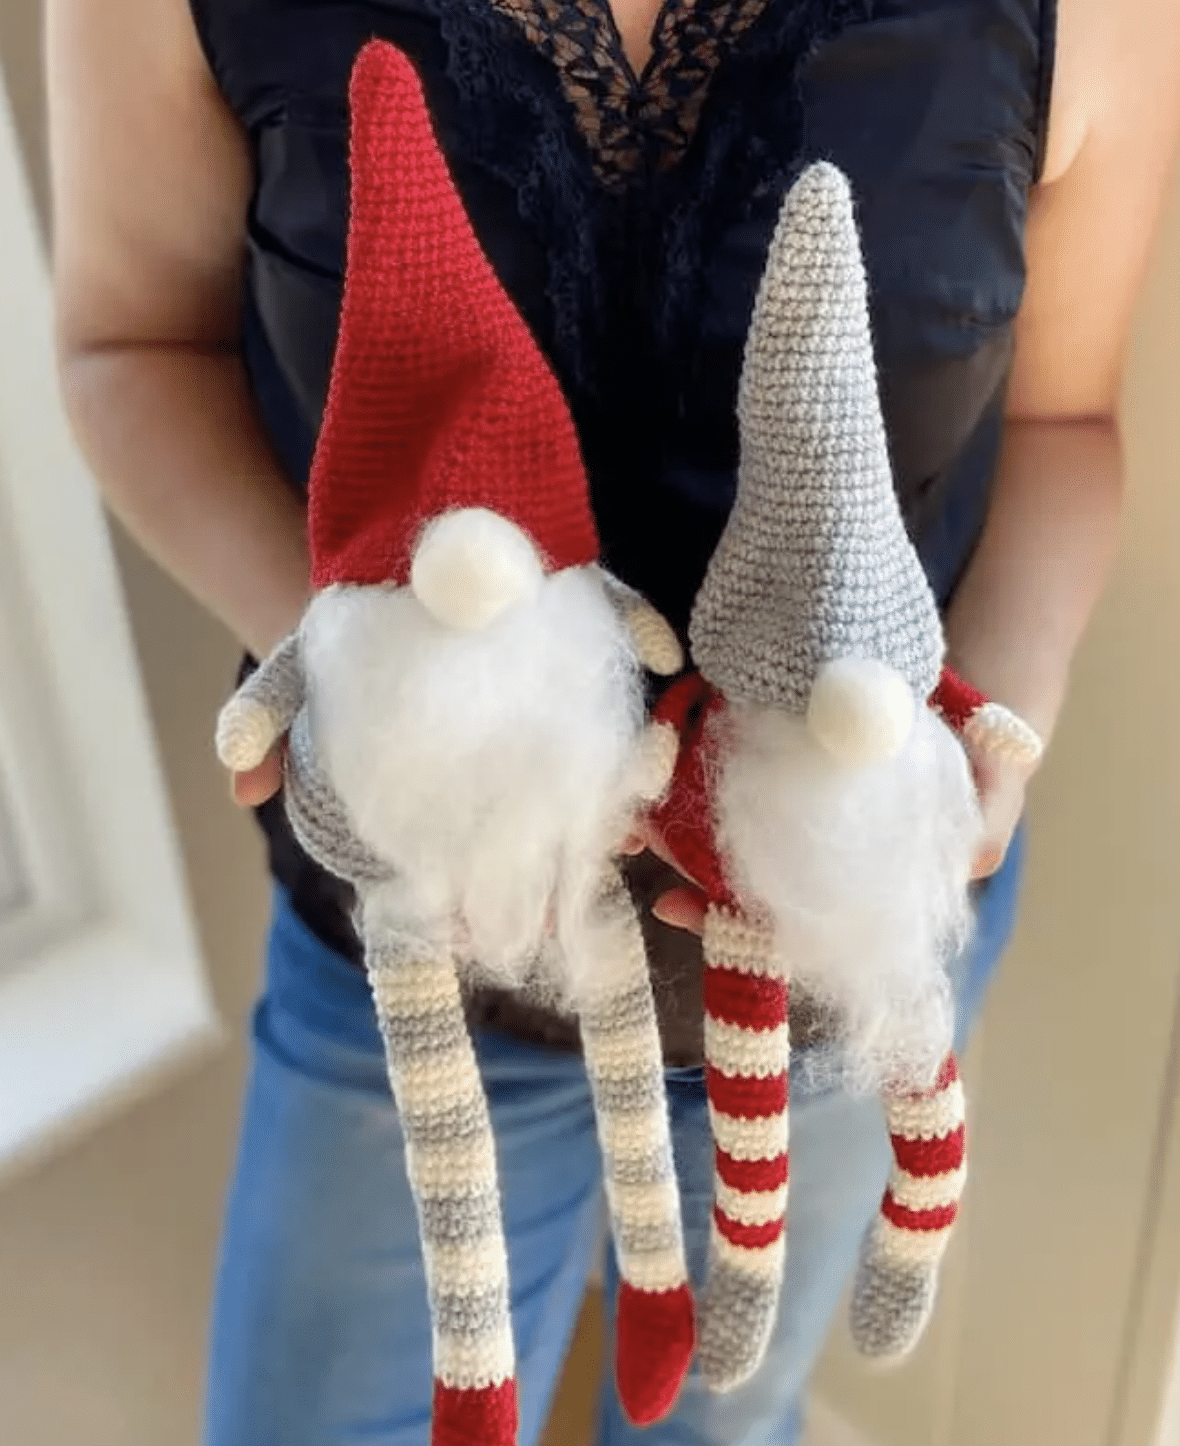 14 Free Crochet Patterns for Adorable Gnomes - Easy Crochet Patterns